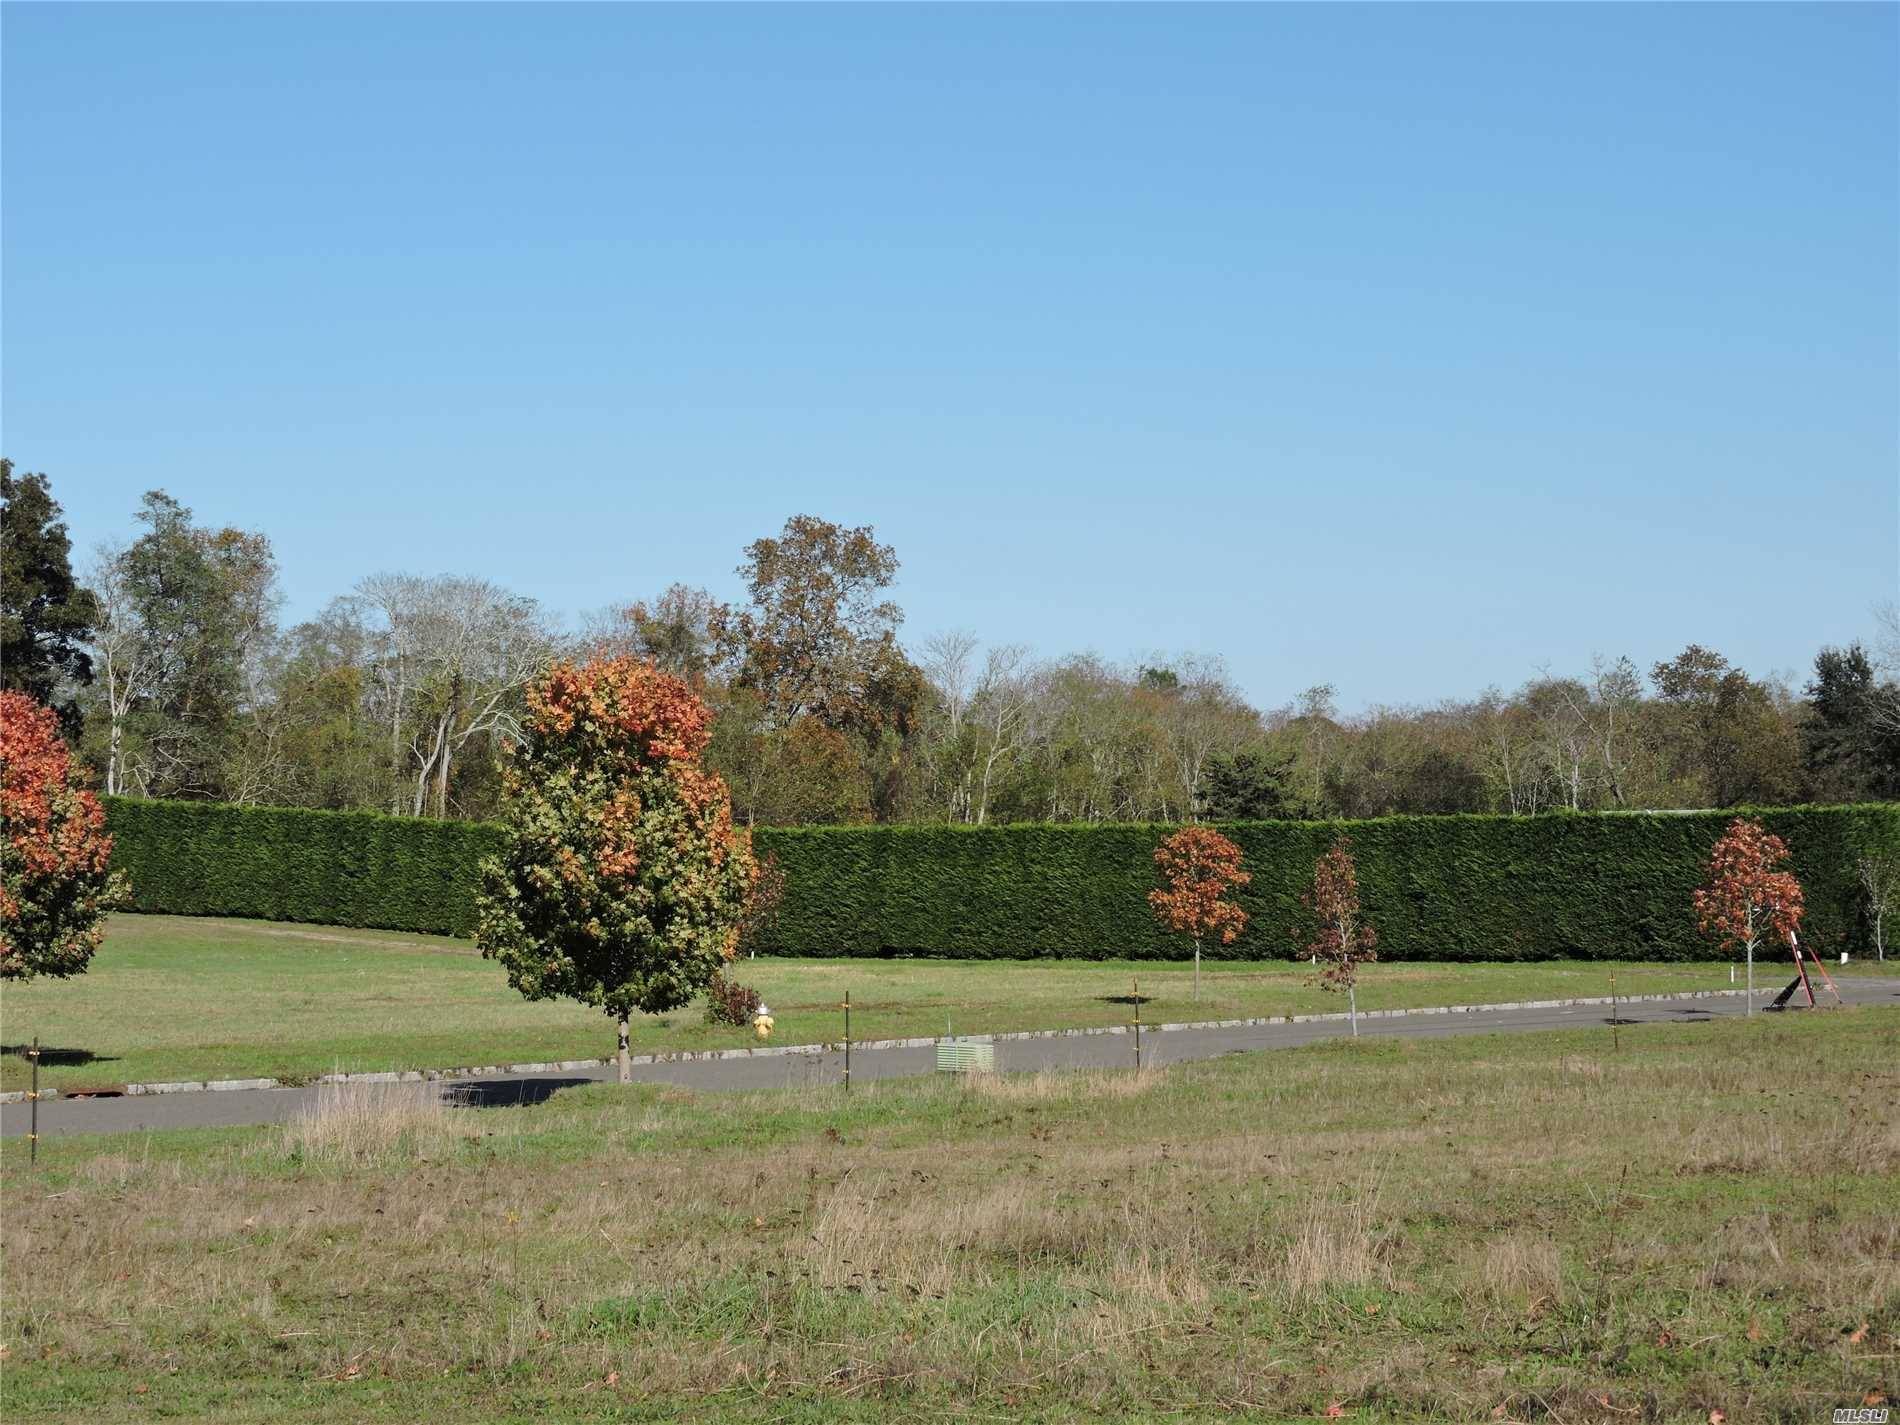 1. 04 Acre Fully Cleared Building Lot On Private Cul De Sac Backs Up To Wooded Town Owned Park.